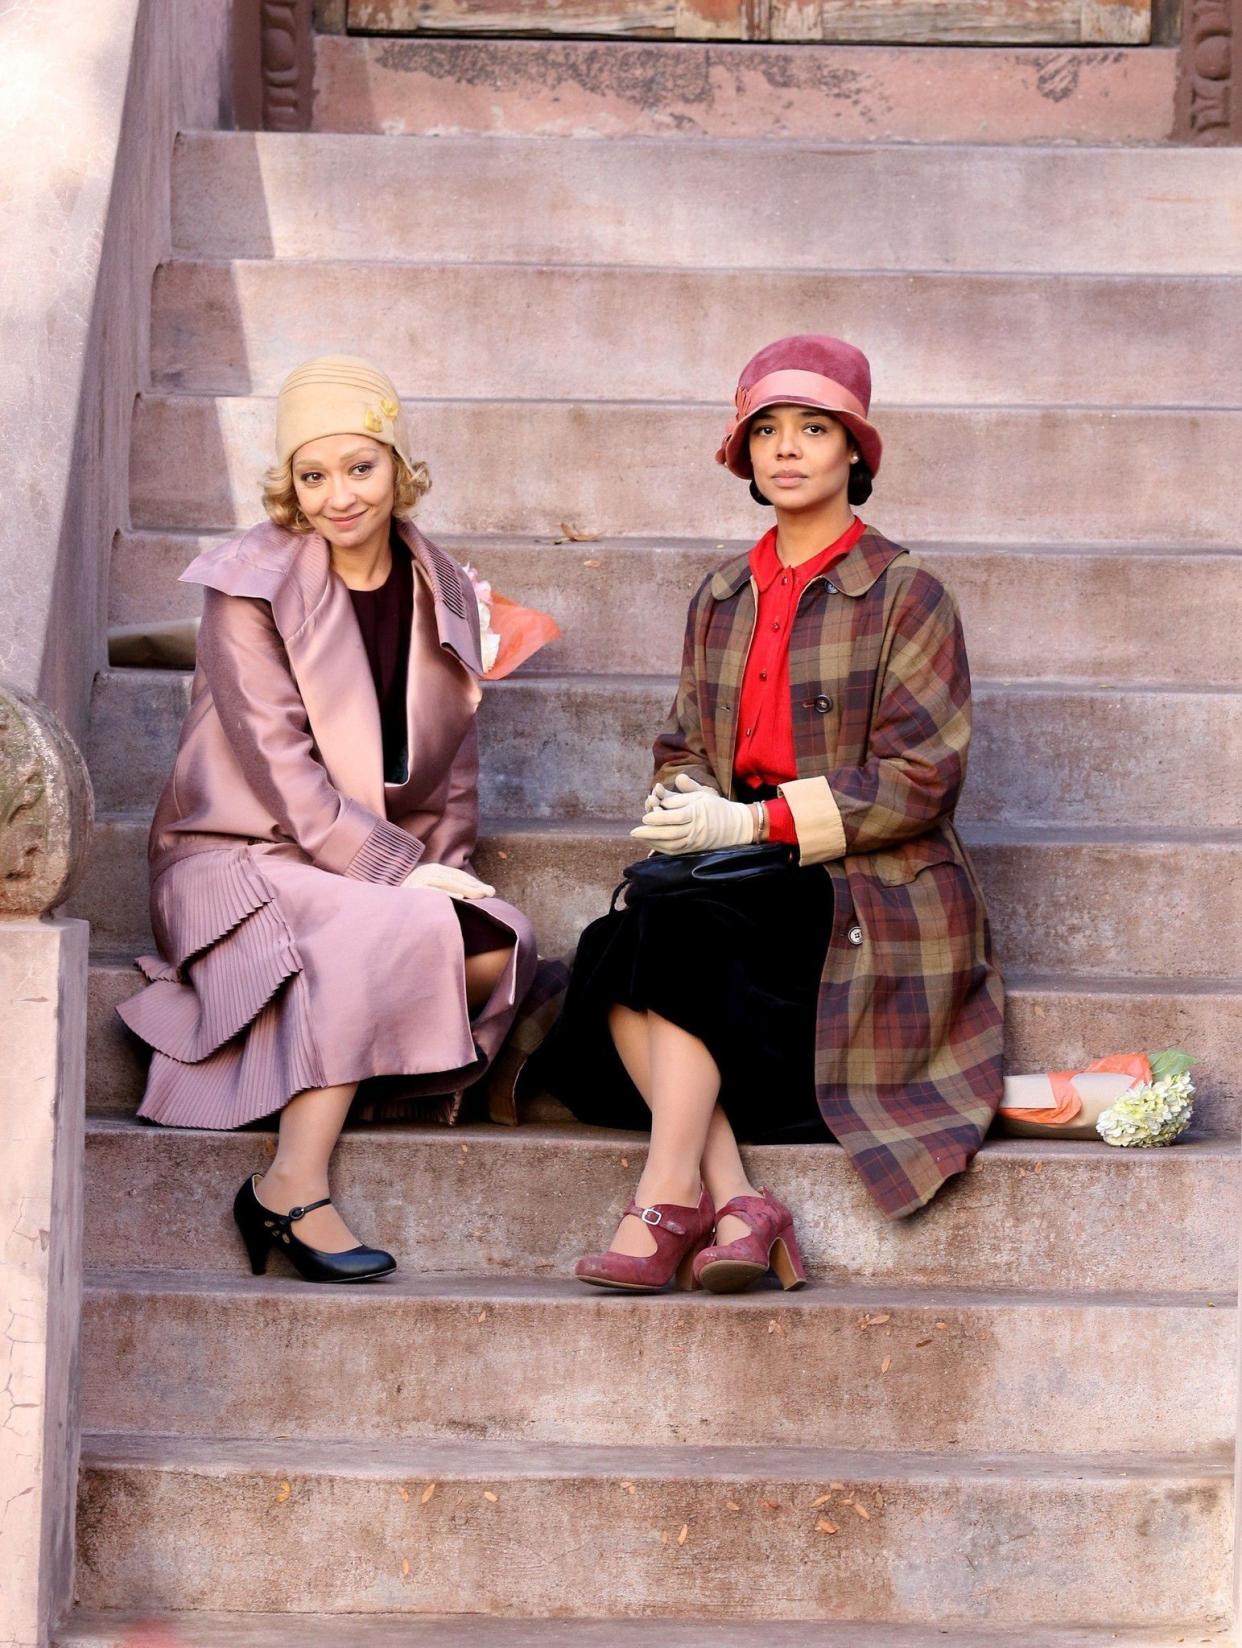 Tessa Thompson (R) and Ruth Negga are going back in time to the 1920s for their upcoming thriller “Passing”. The actresses, dressed to head to toe in ‘20s fashion, were spotted filming together in Manhattan on Nov. 6, 2019. The movie’s title refers to racial passing and is based on the 1920s novel by Nella Larsen.